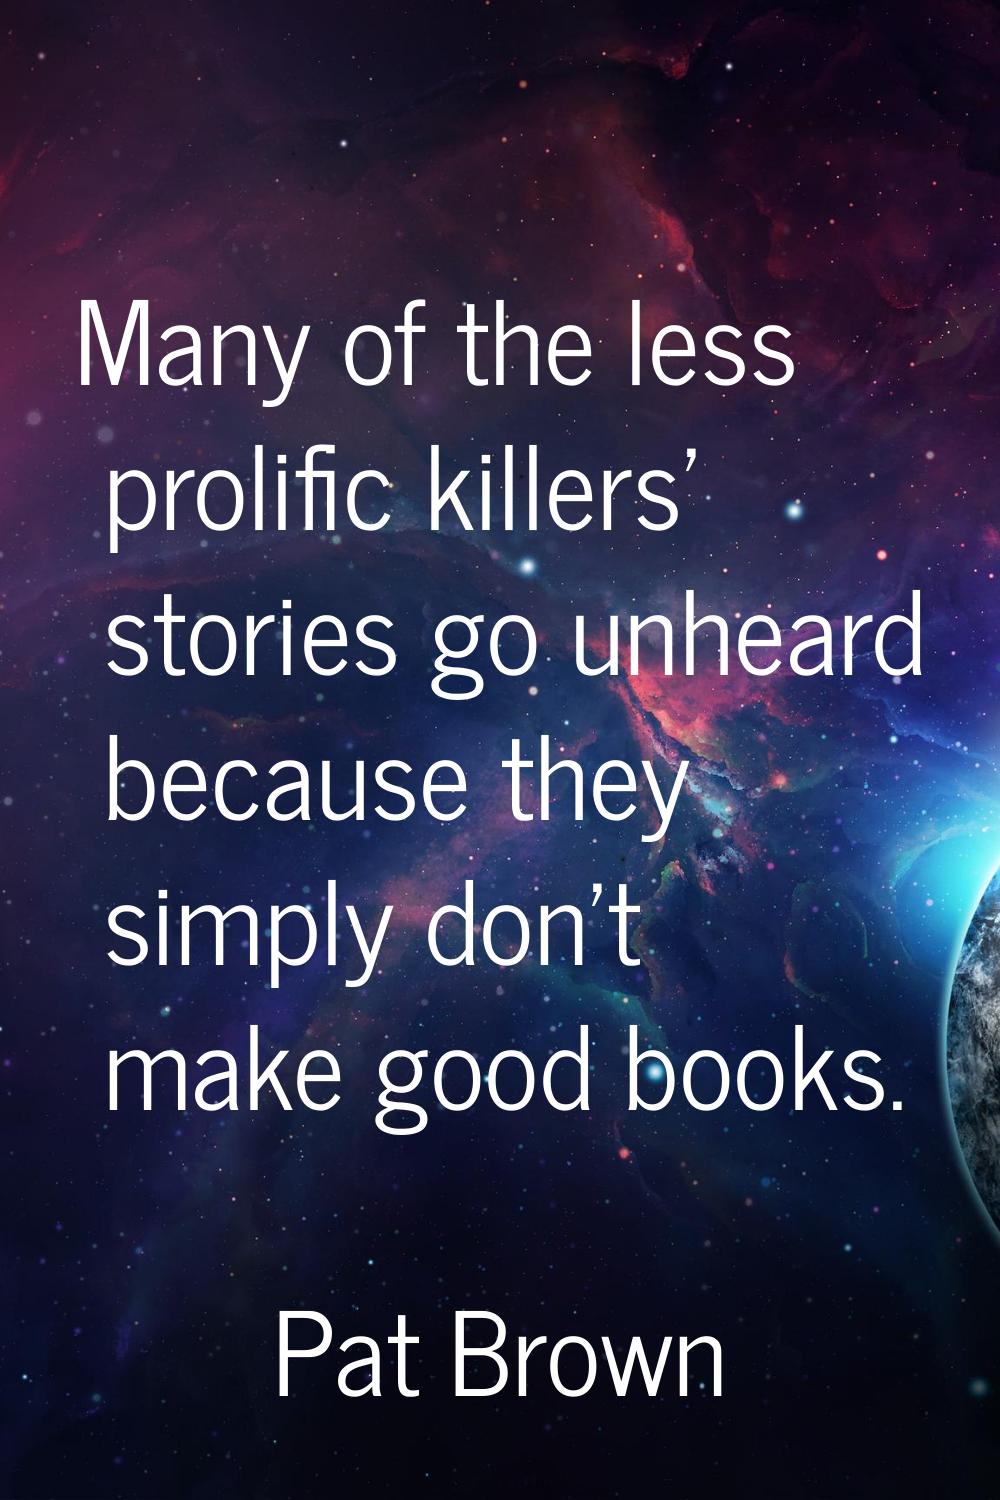 Many of the less prolific killers' stories go unheard because they simply don't make good books.